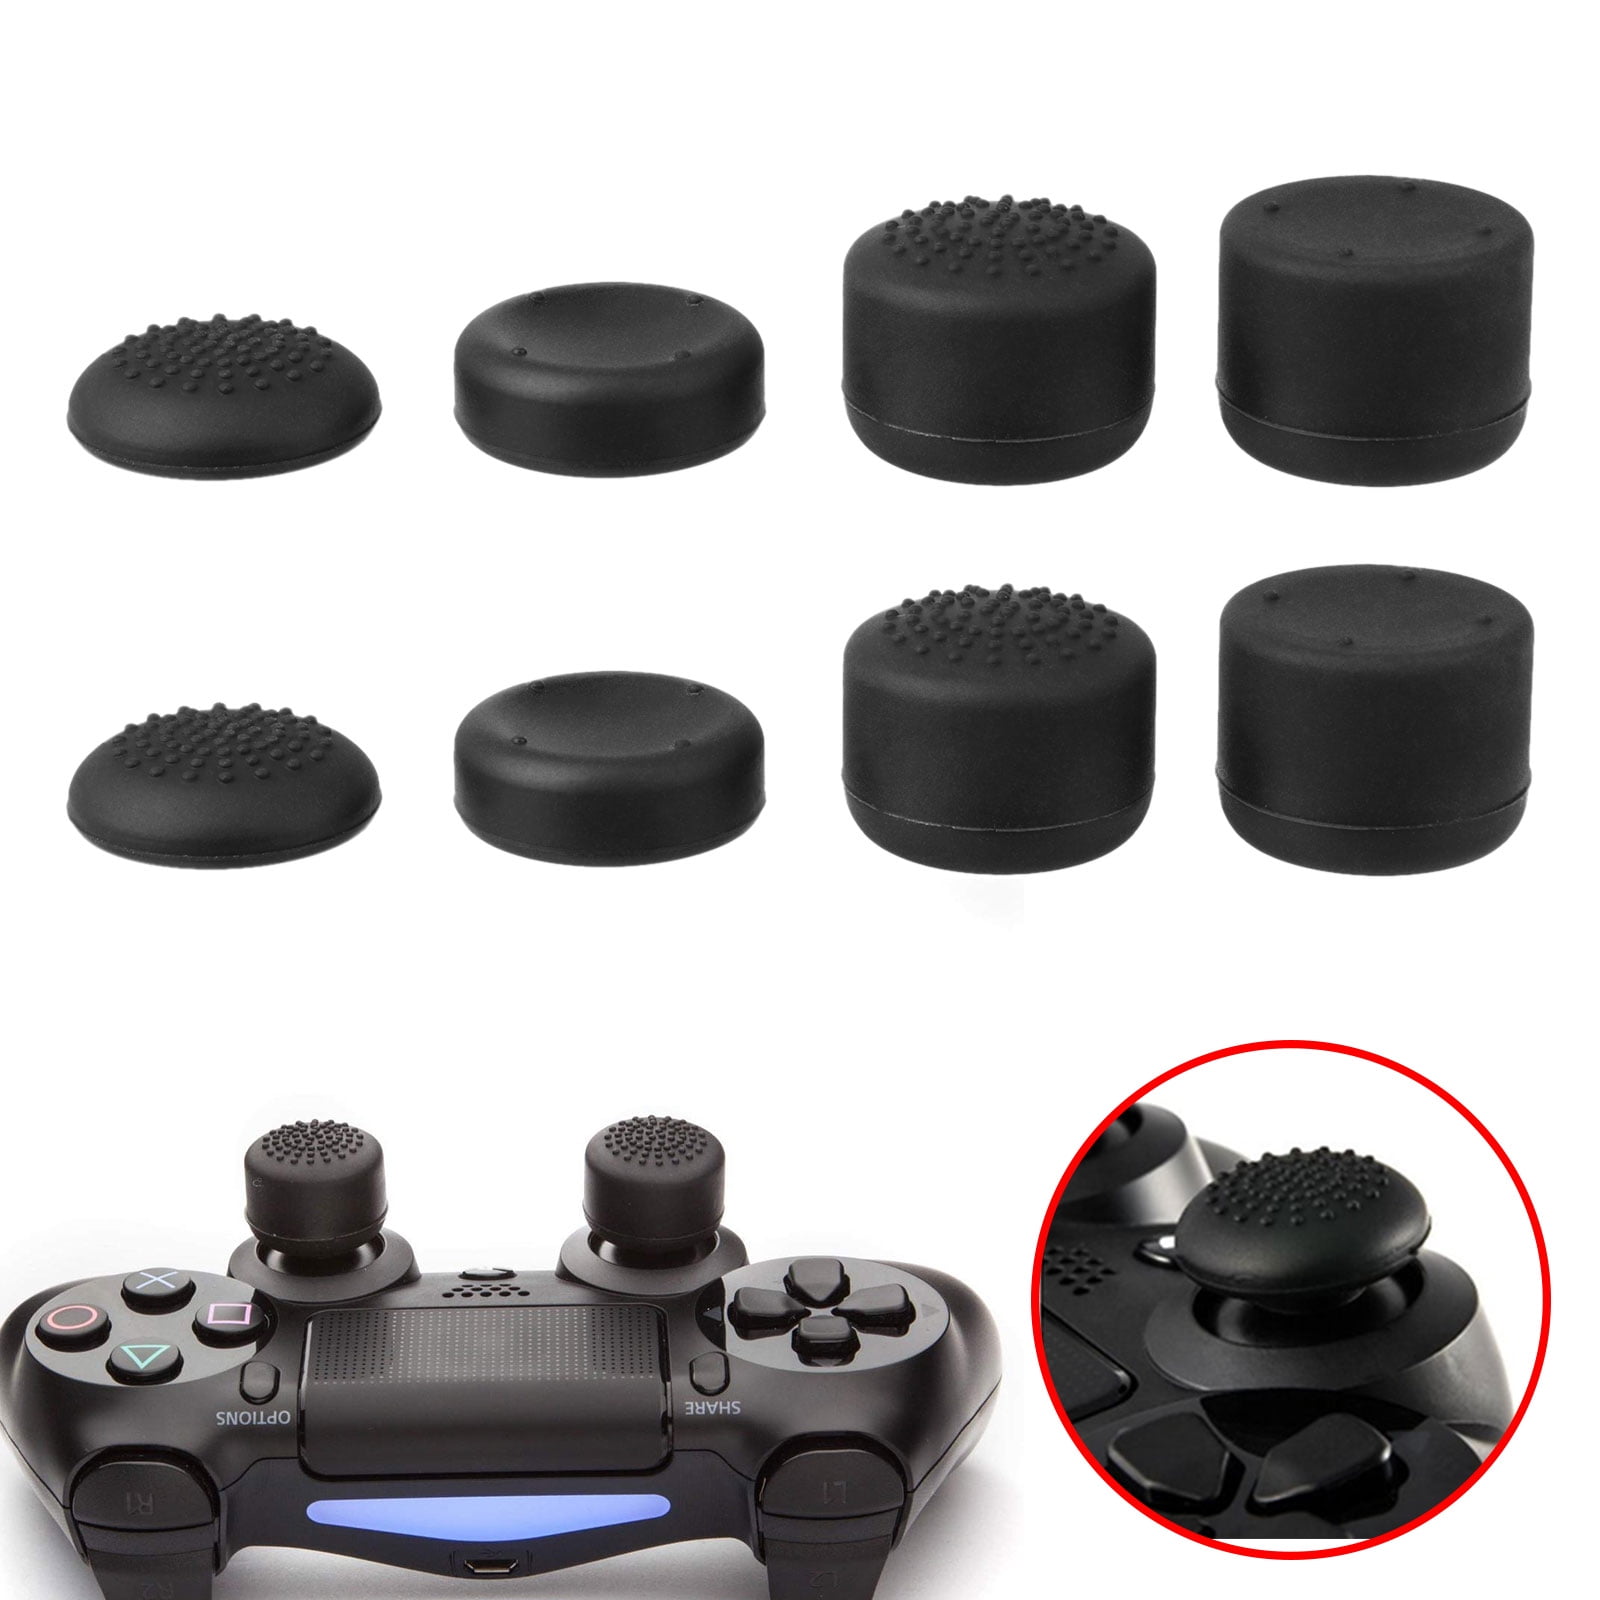 4 x Rubber Thumb Stick Cover Grip Caps For Sony PS4 XBOX One Analog Controller 